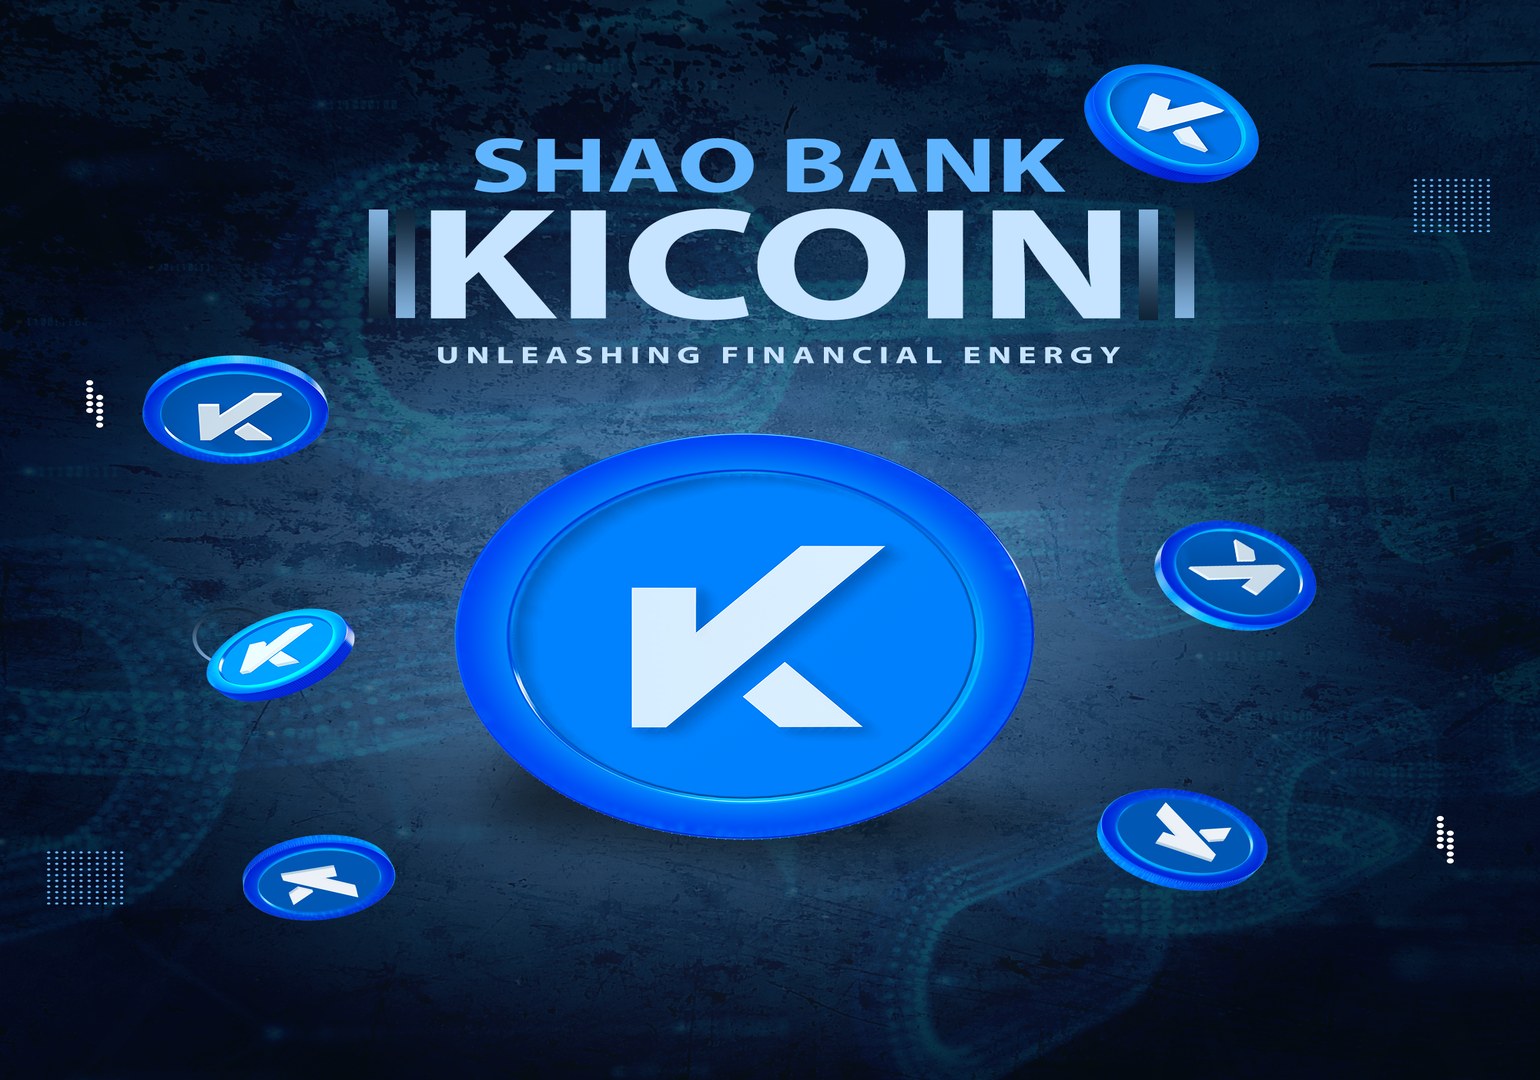 Shao Bank and Financial Partners to Launch Kicoin, A Groundbreaking Cryptocurrency for the Future of Finance